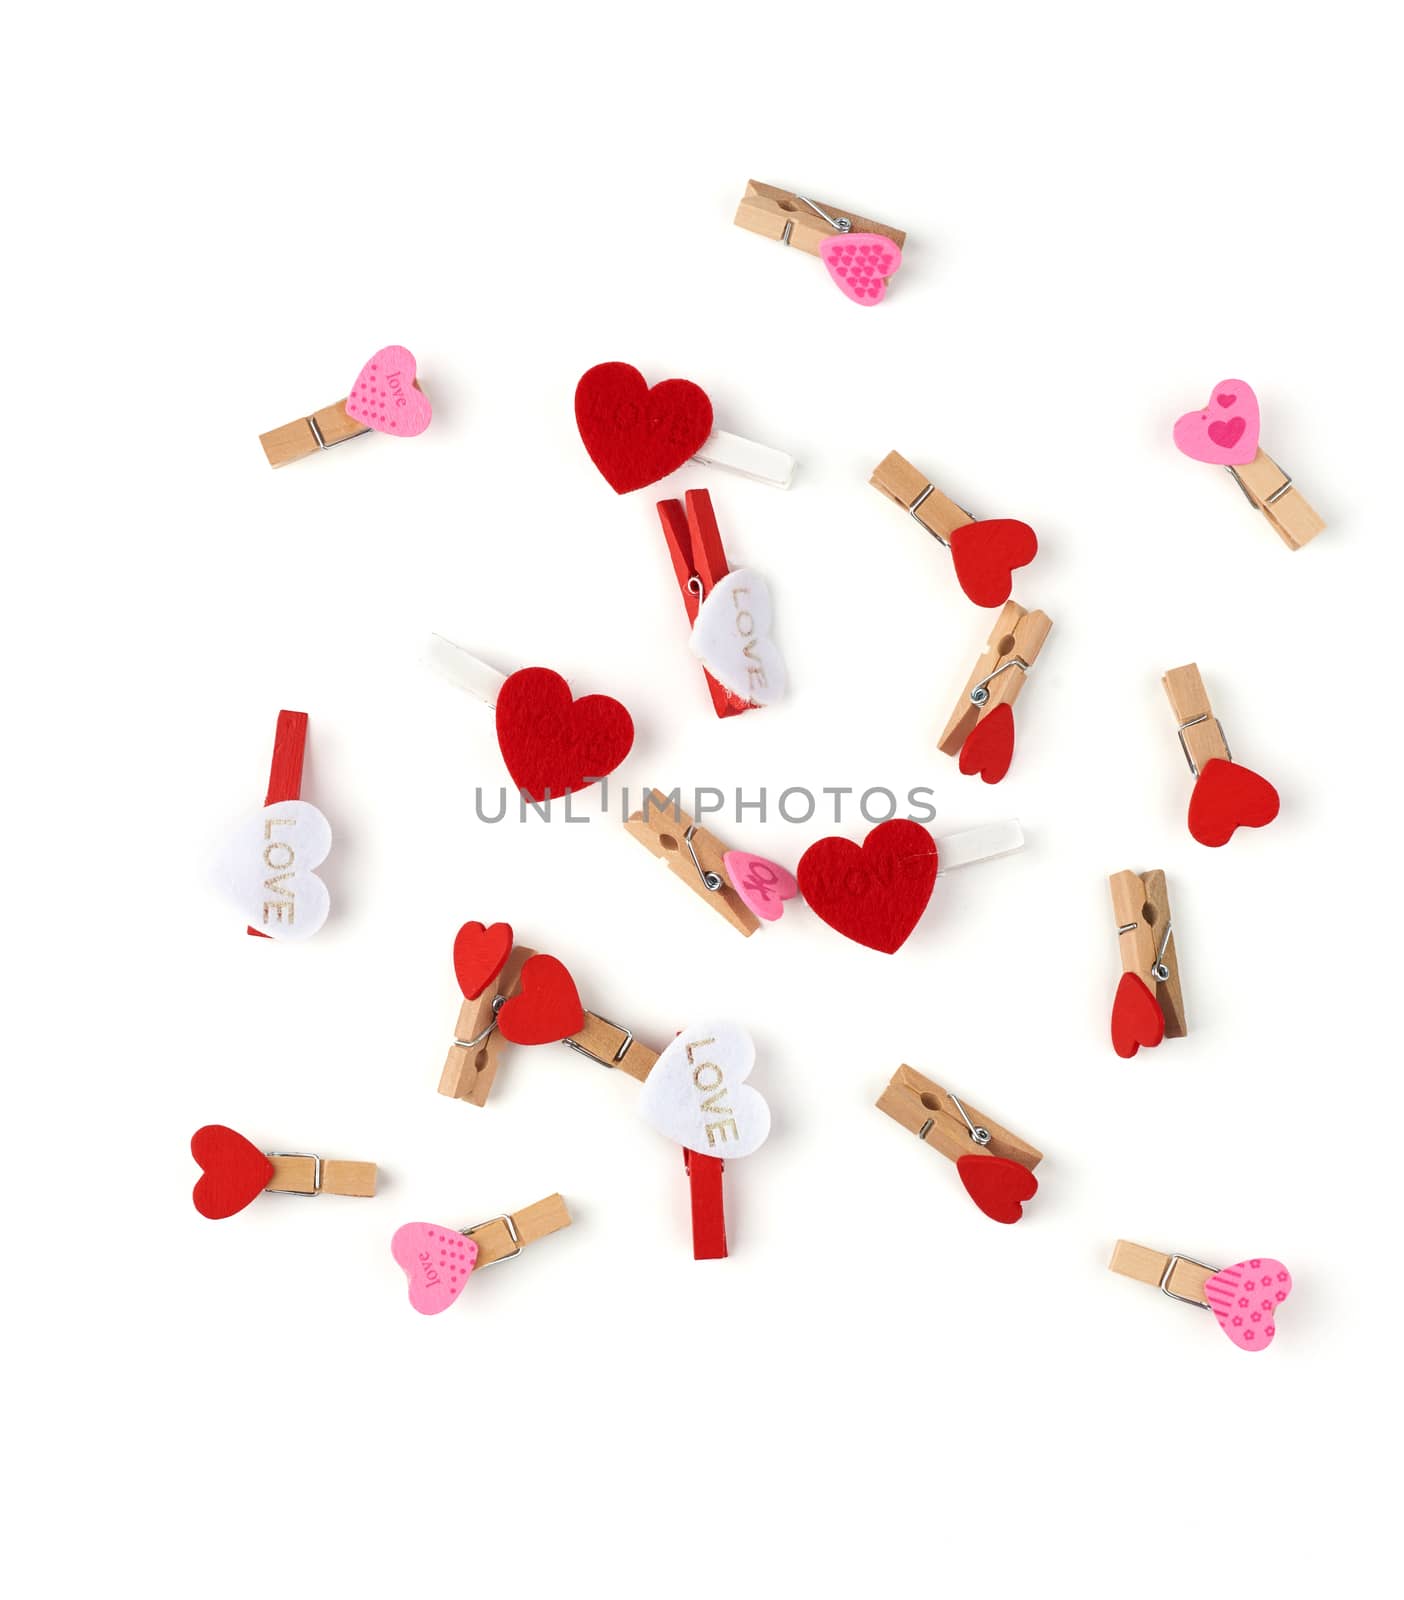 wooden decorative clothespins scattered on a white background with red hearts, top view